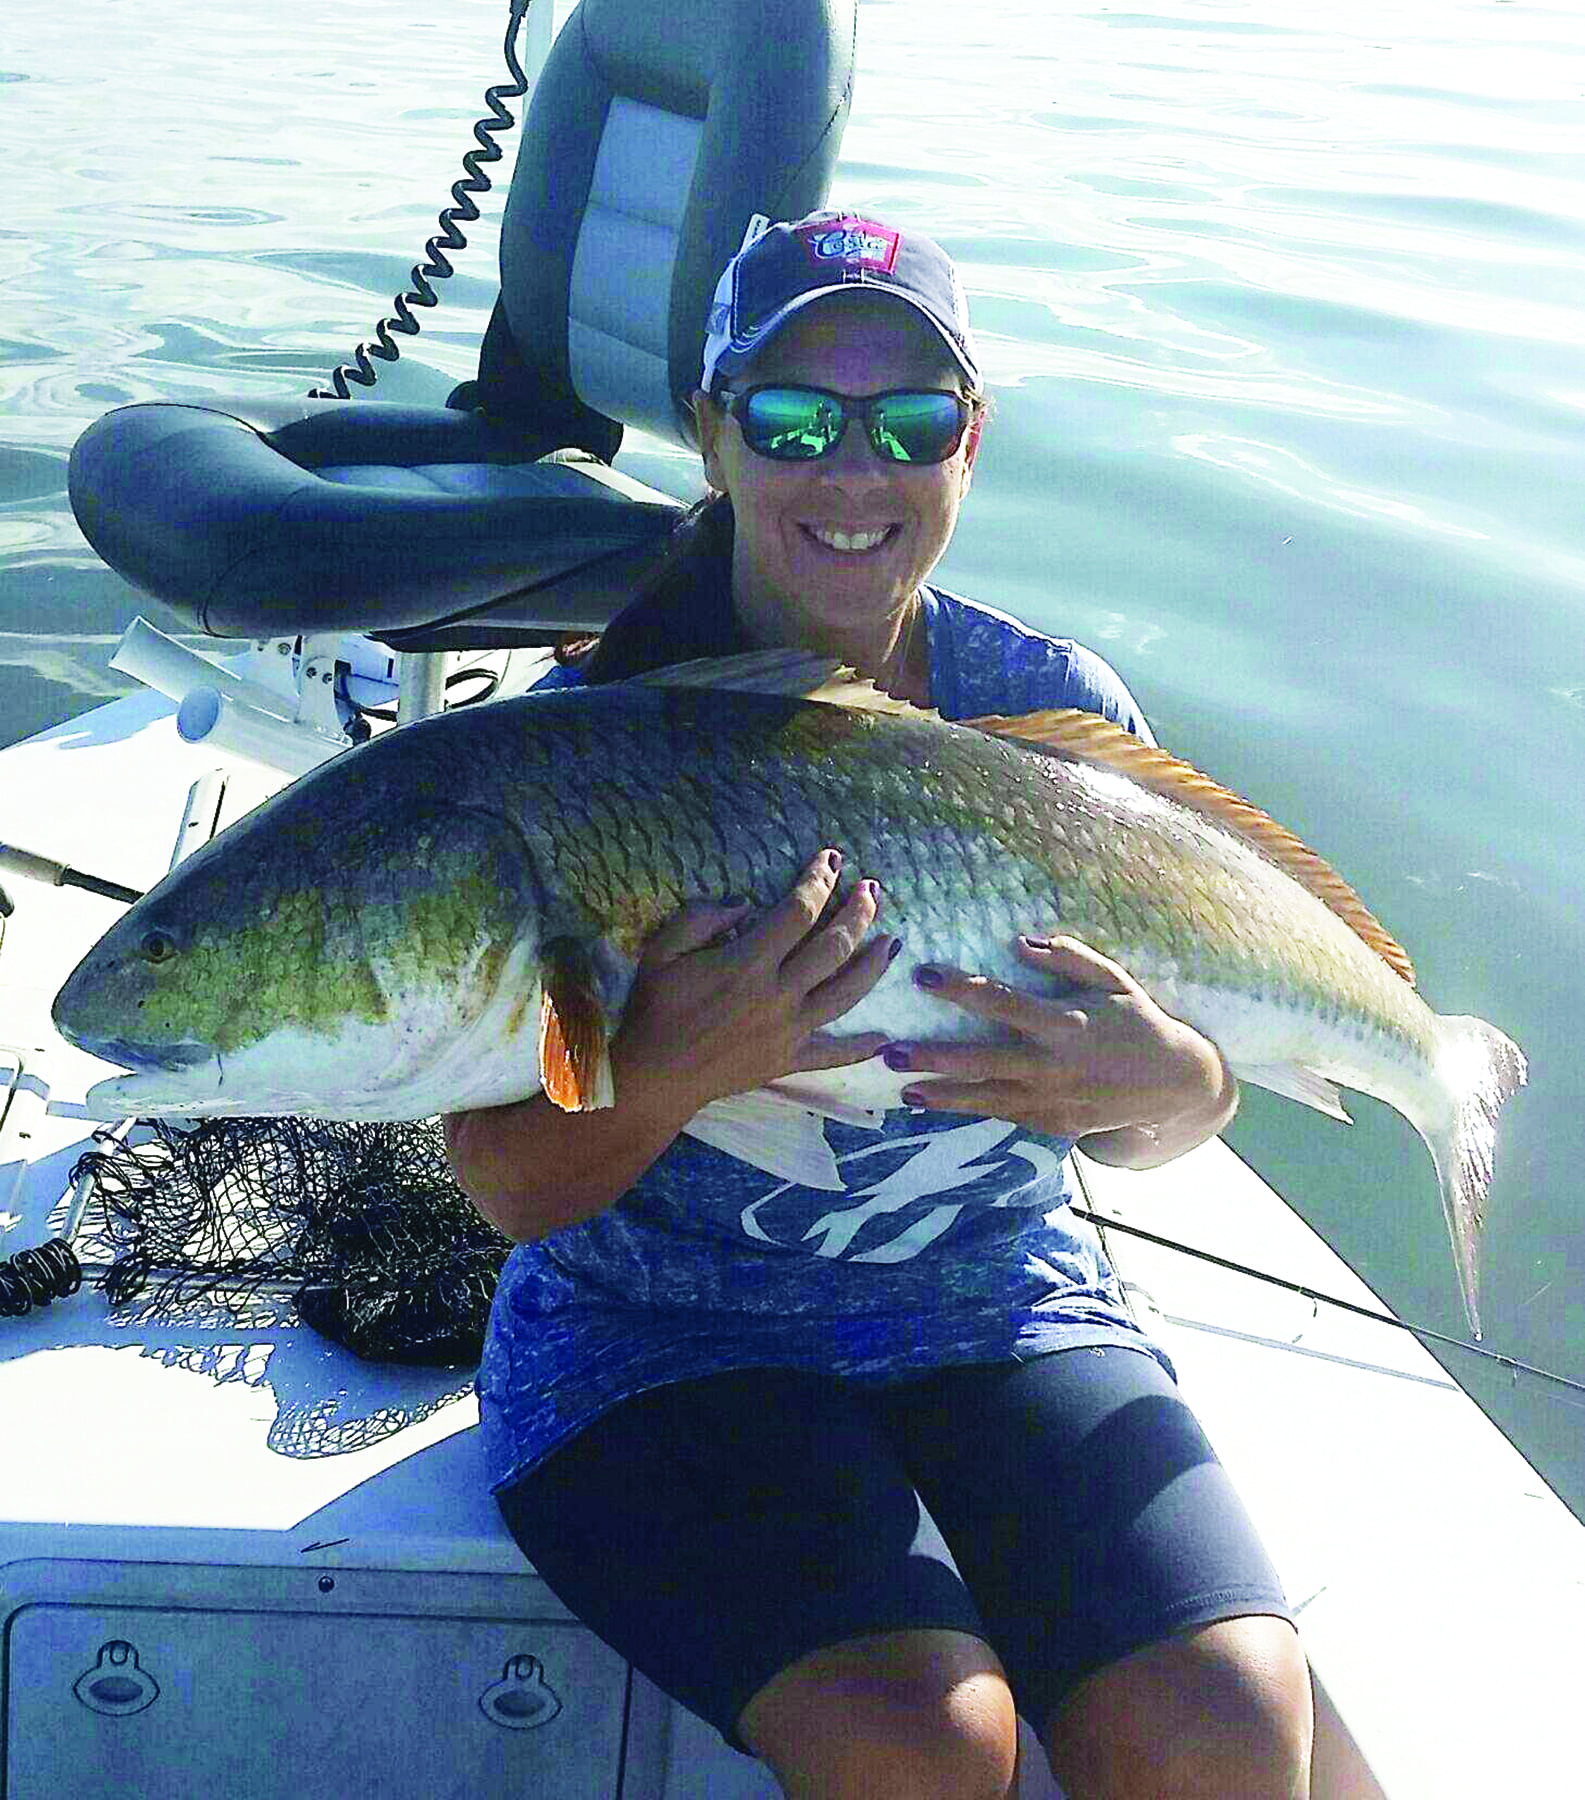 This is a 45" Red Drum caught by Denise Rolon on a Finger Mullet near Bio Lab.  He was quickly released after this photo.